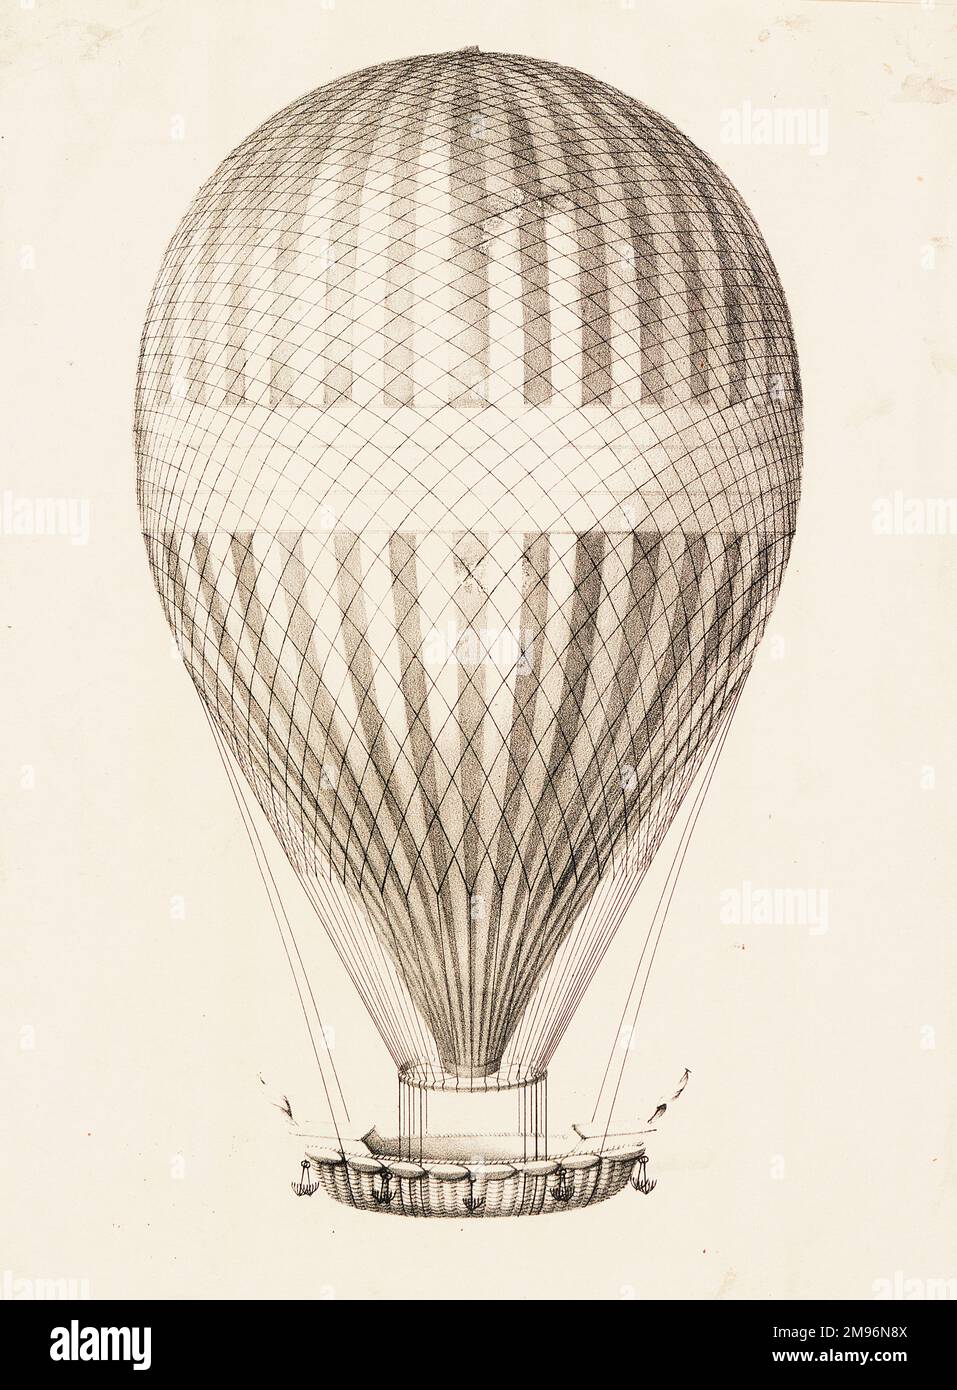 Large balloon image, part of a prospectus promoting the purchase of shares in the balloon company.  'Aeronautic Association - For promoting geographical surveys of some of the remaining undiscovered tracts of the globe'  To be constructed under the personal superintendence of Mr Graham.   (1 of 2, without text) Stock Photo